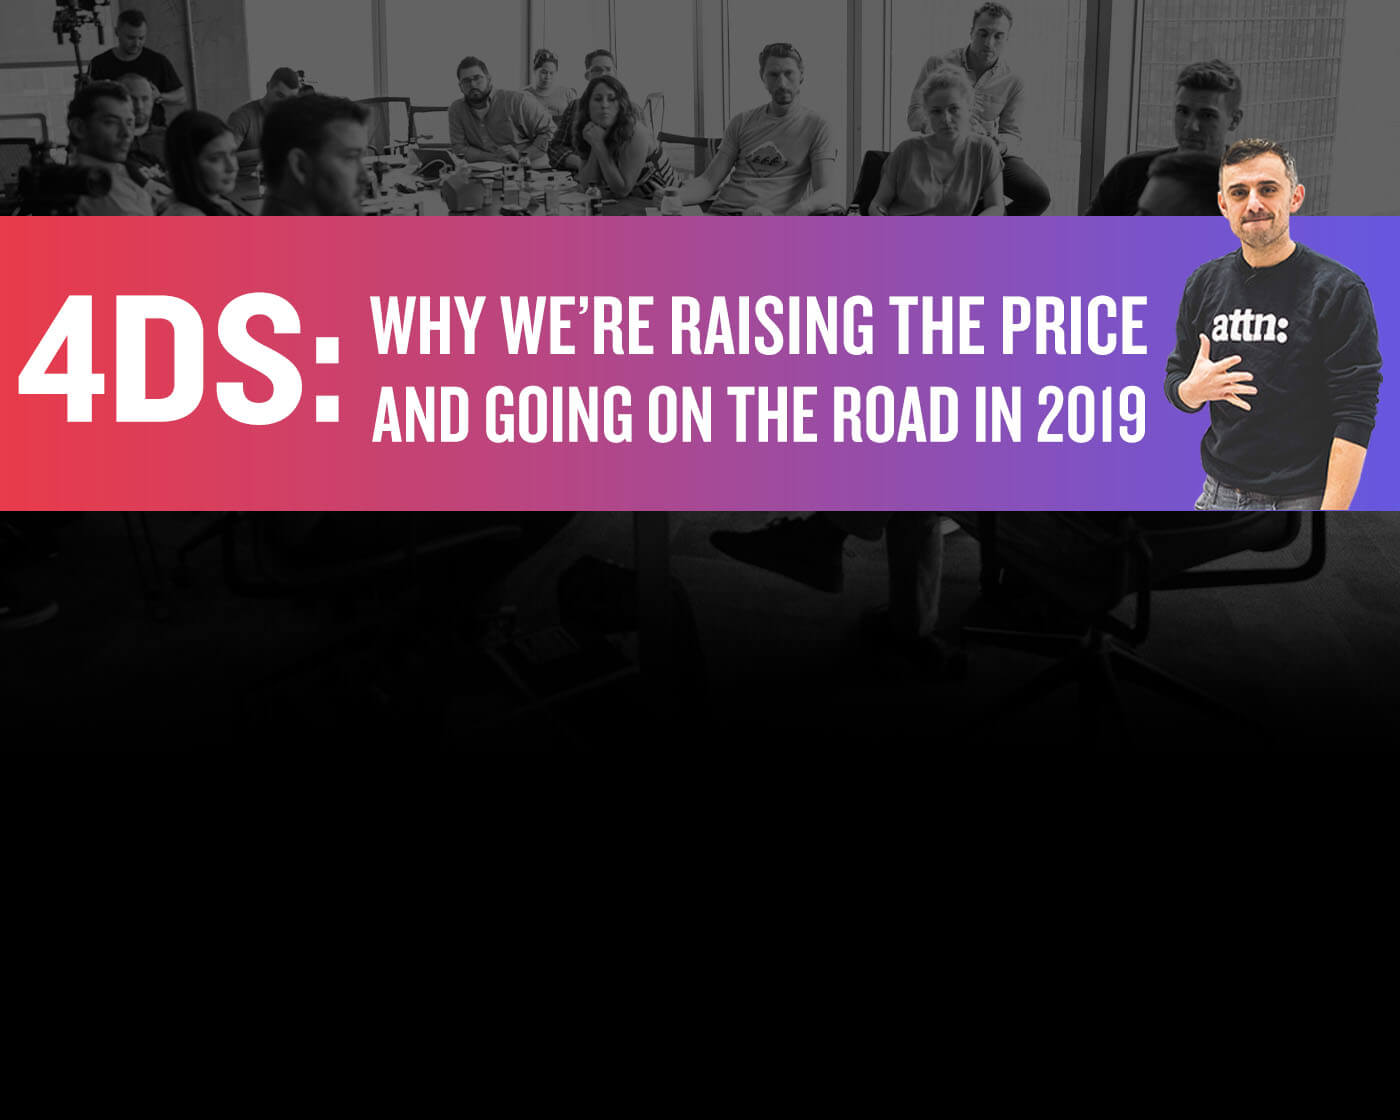 4Ds: Why We’re Raising the Price and Going on the Road in 2019